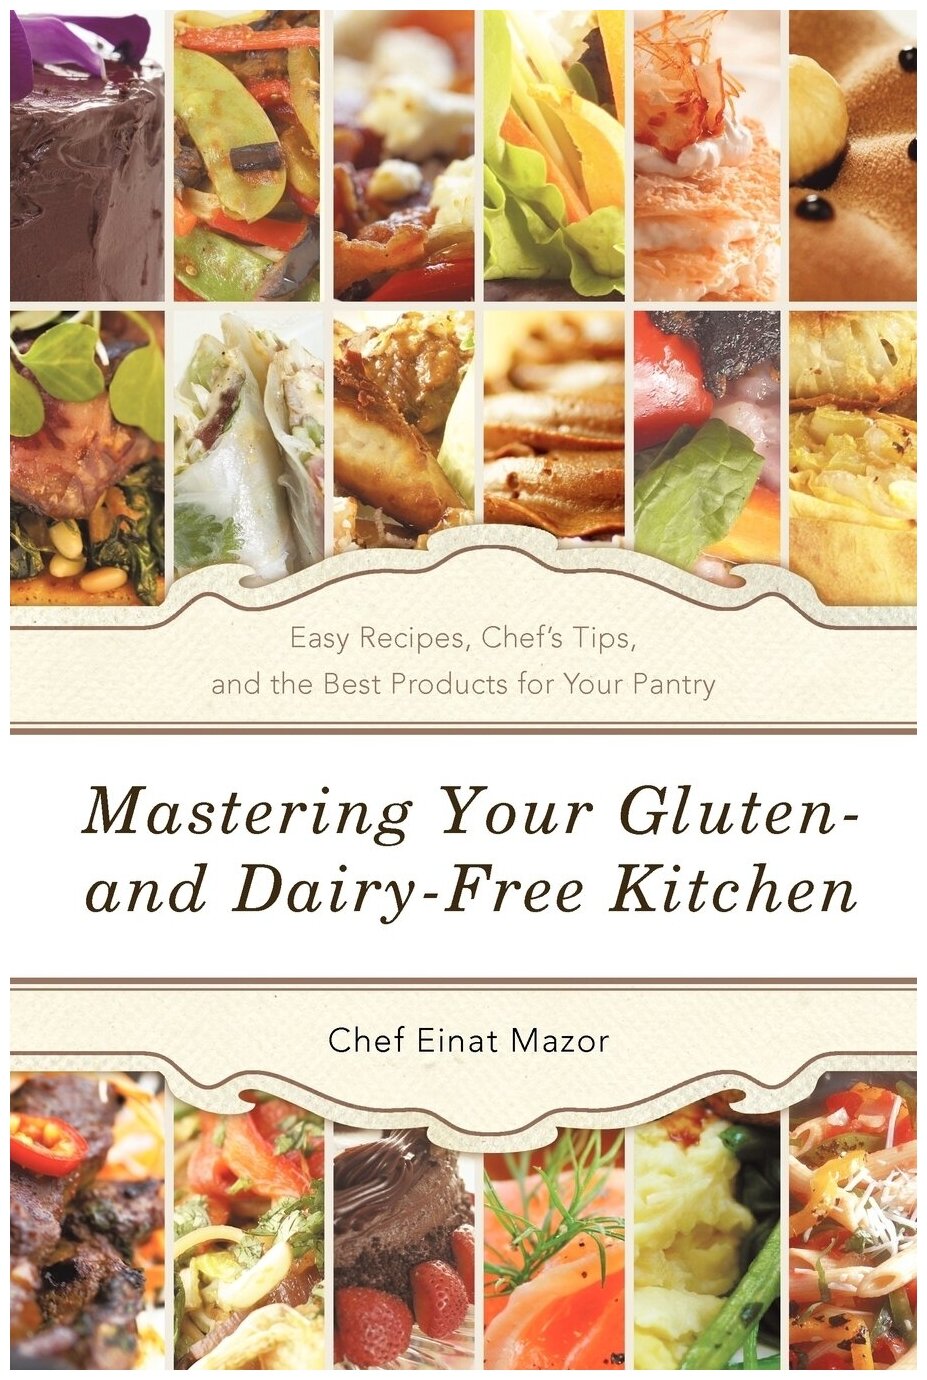 Mastering Your Gluten- And Dairy-Free Kitchen. Easy Recipes, Chef's Tips, and the Best Products for Your Pantry